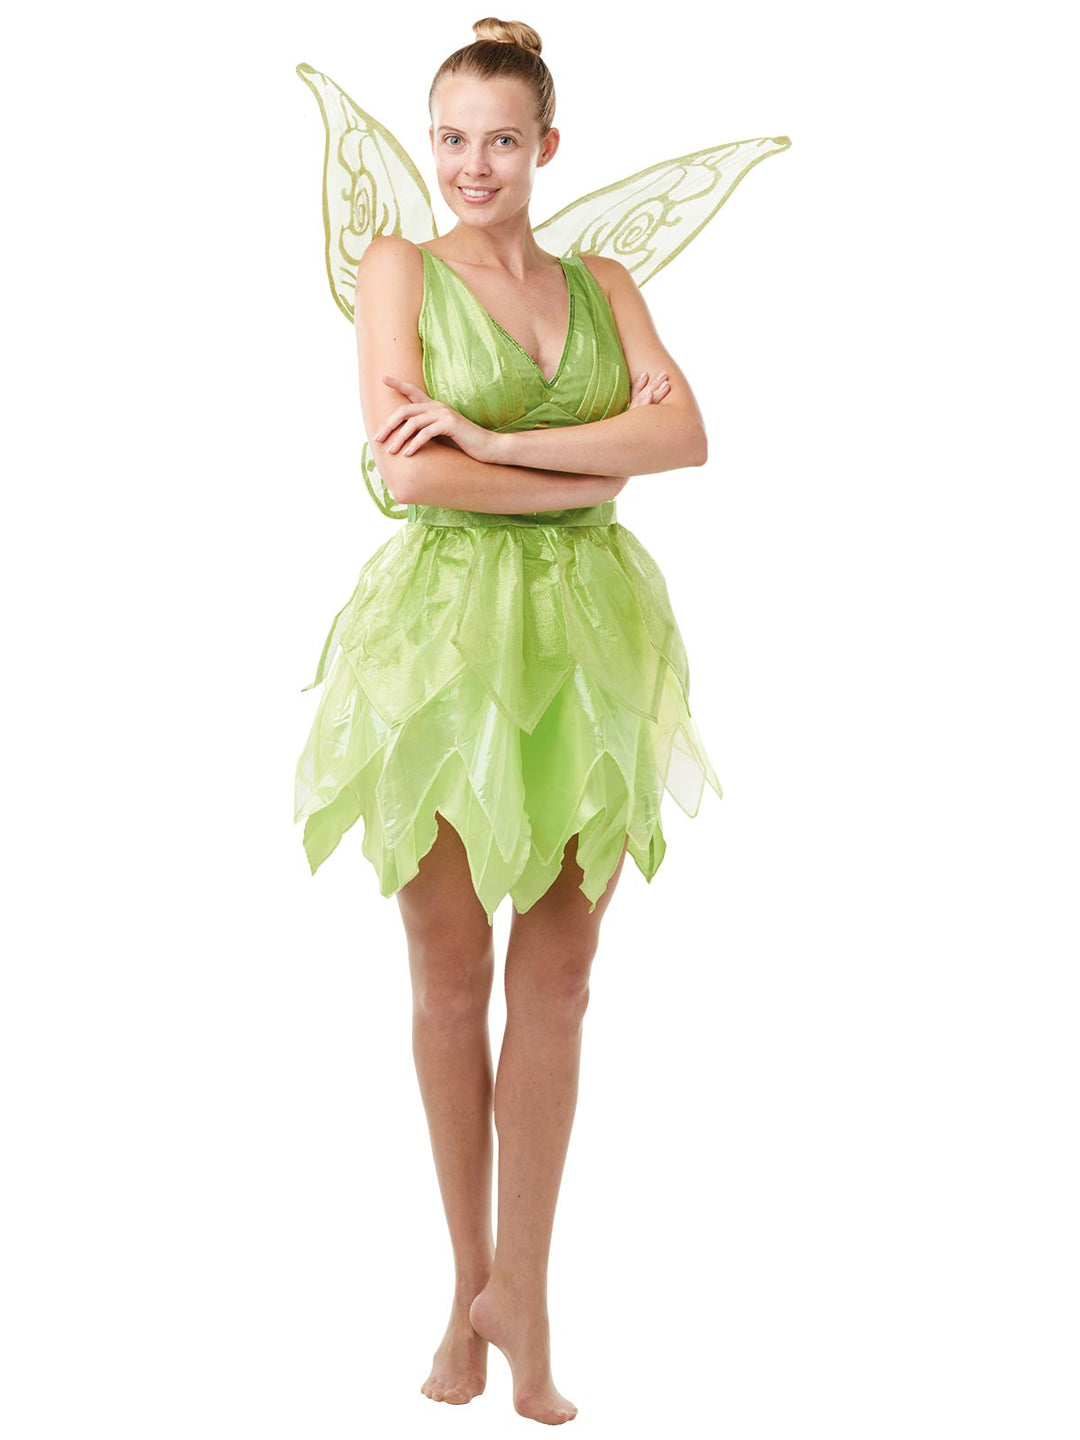 TINKER BELL DELUXE COSTUME, ADULT